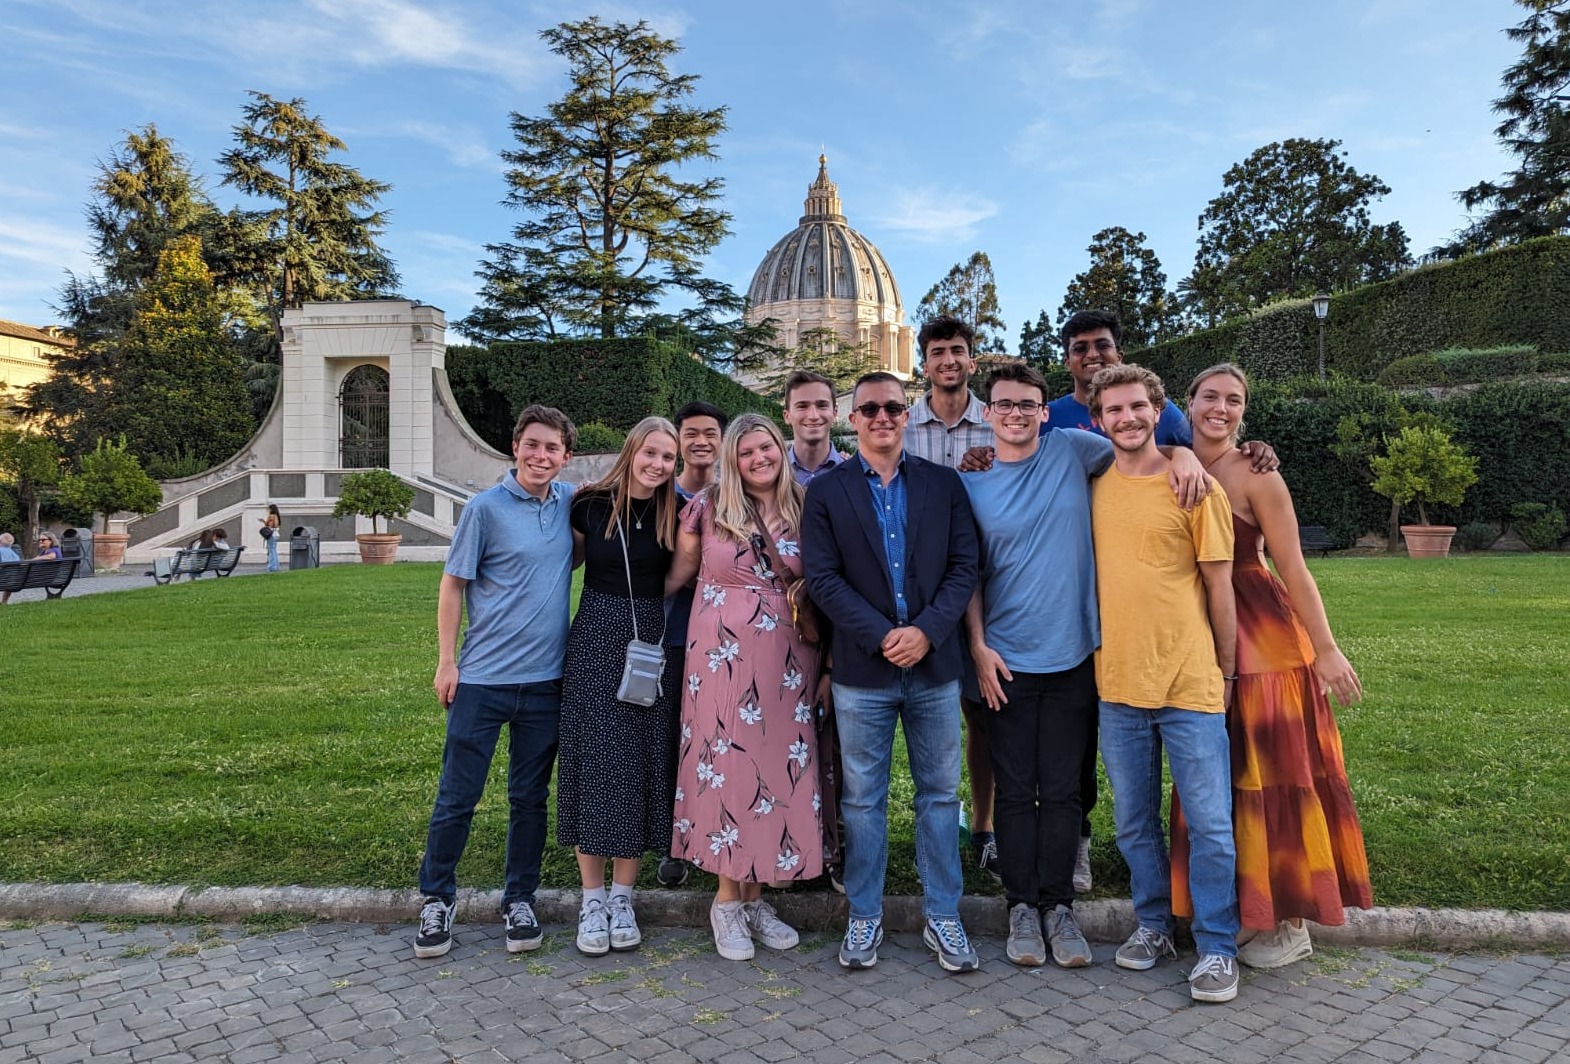 Students pose in front of the Vatican dome